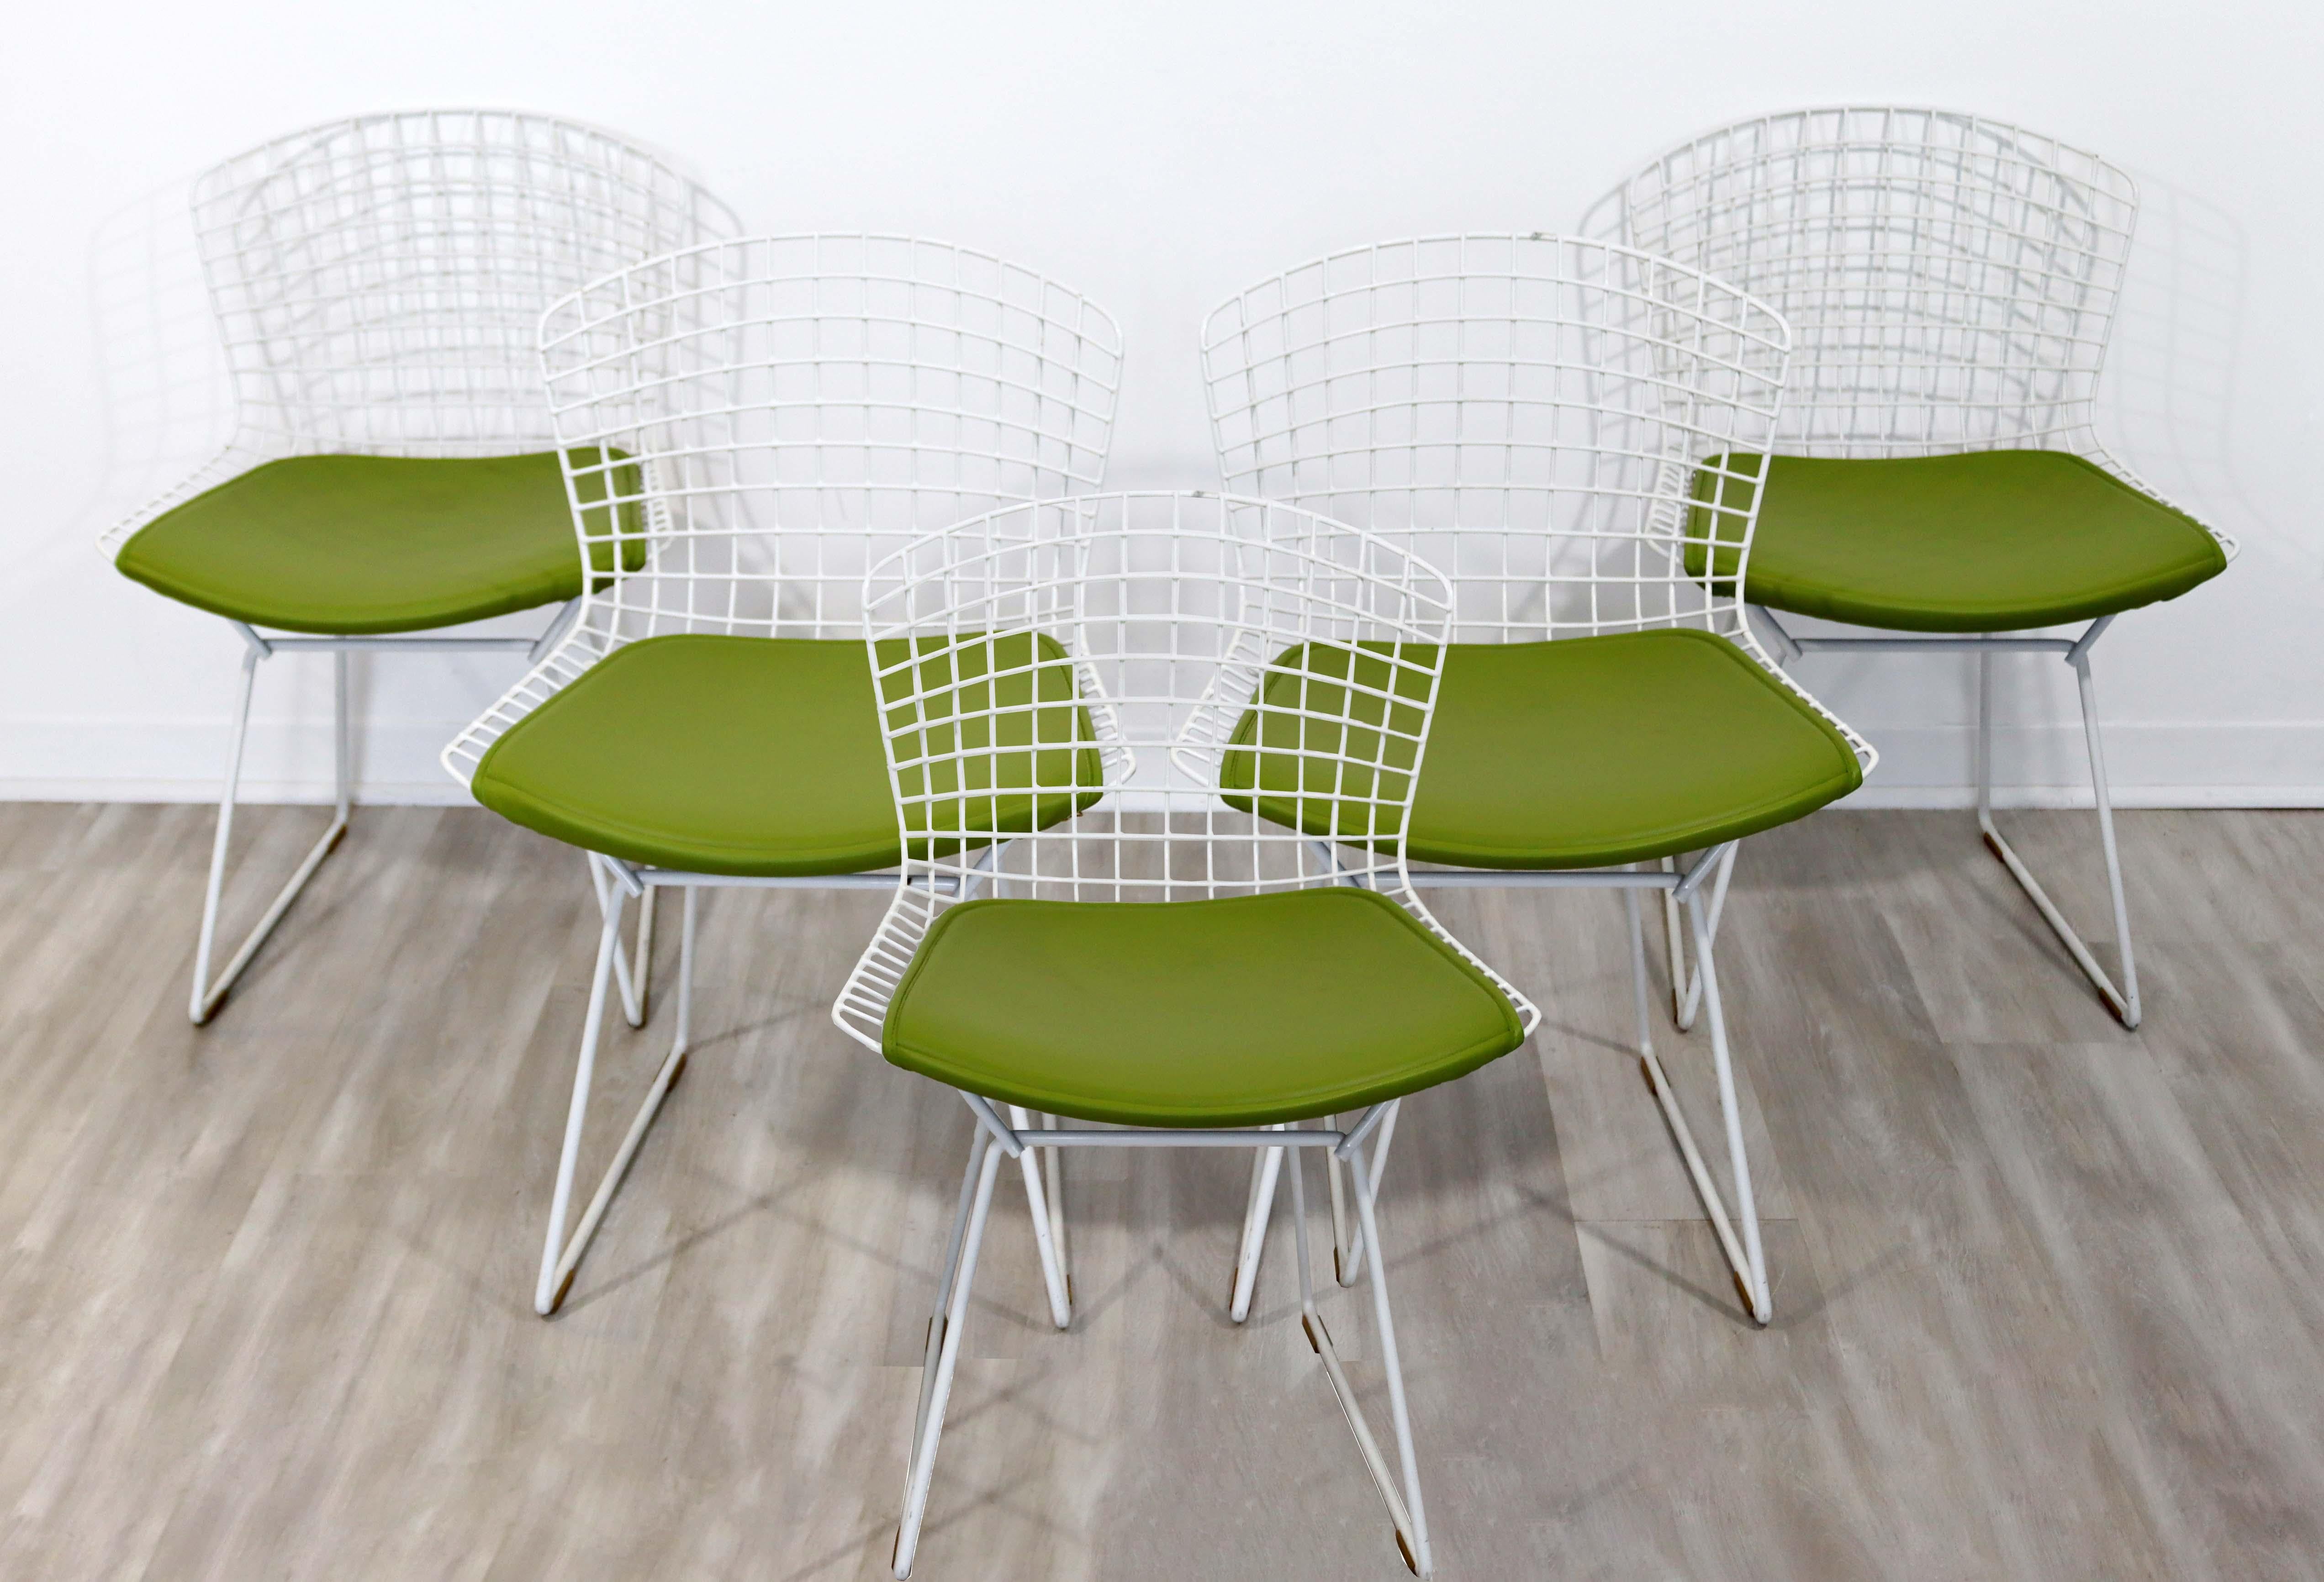 For your consideration is a fantastic set of four, wire side dining chairs, in the style of Harry Bertoia. In very good vintage condition. The dimensions are 21